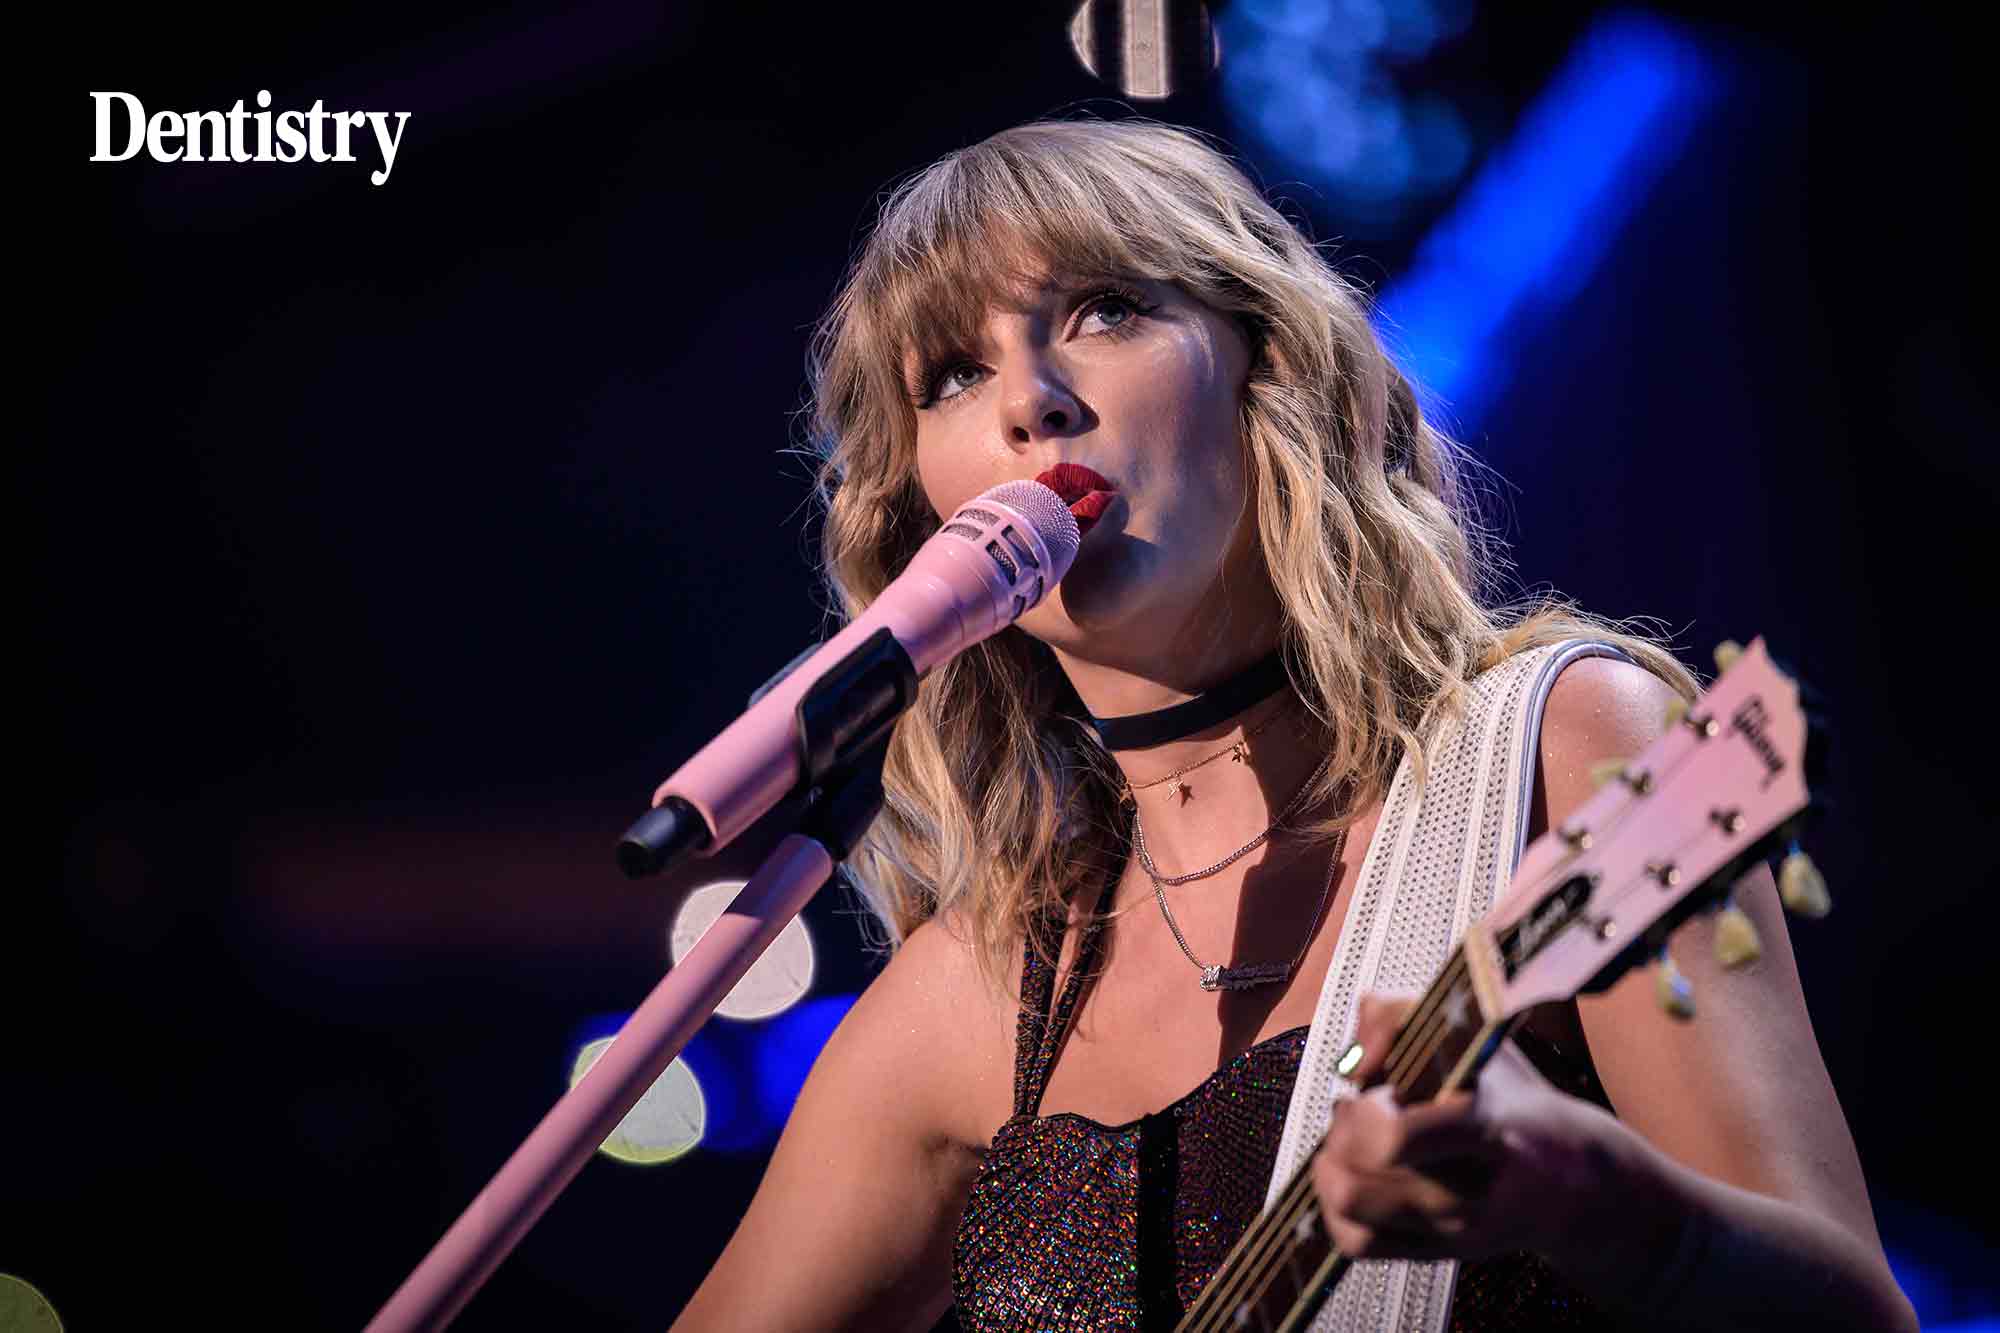 Taylor Swift tickets 'easier to get than NHS dental appointment', says MP